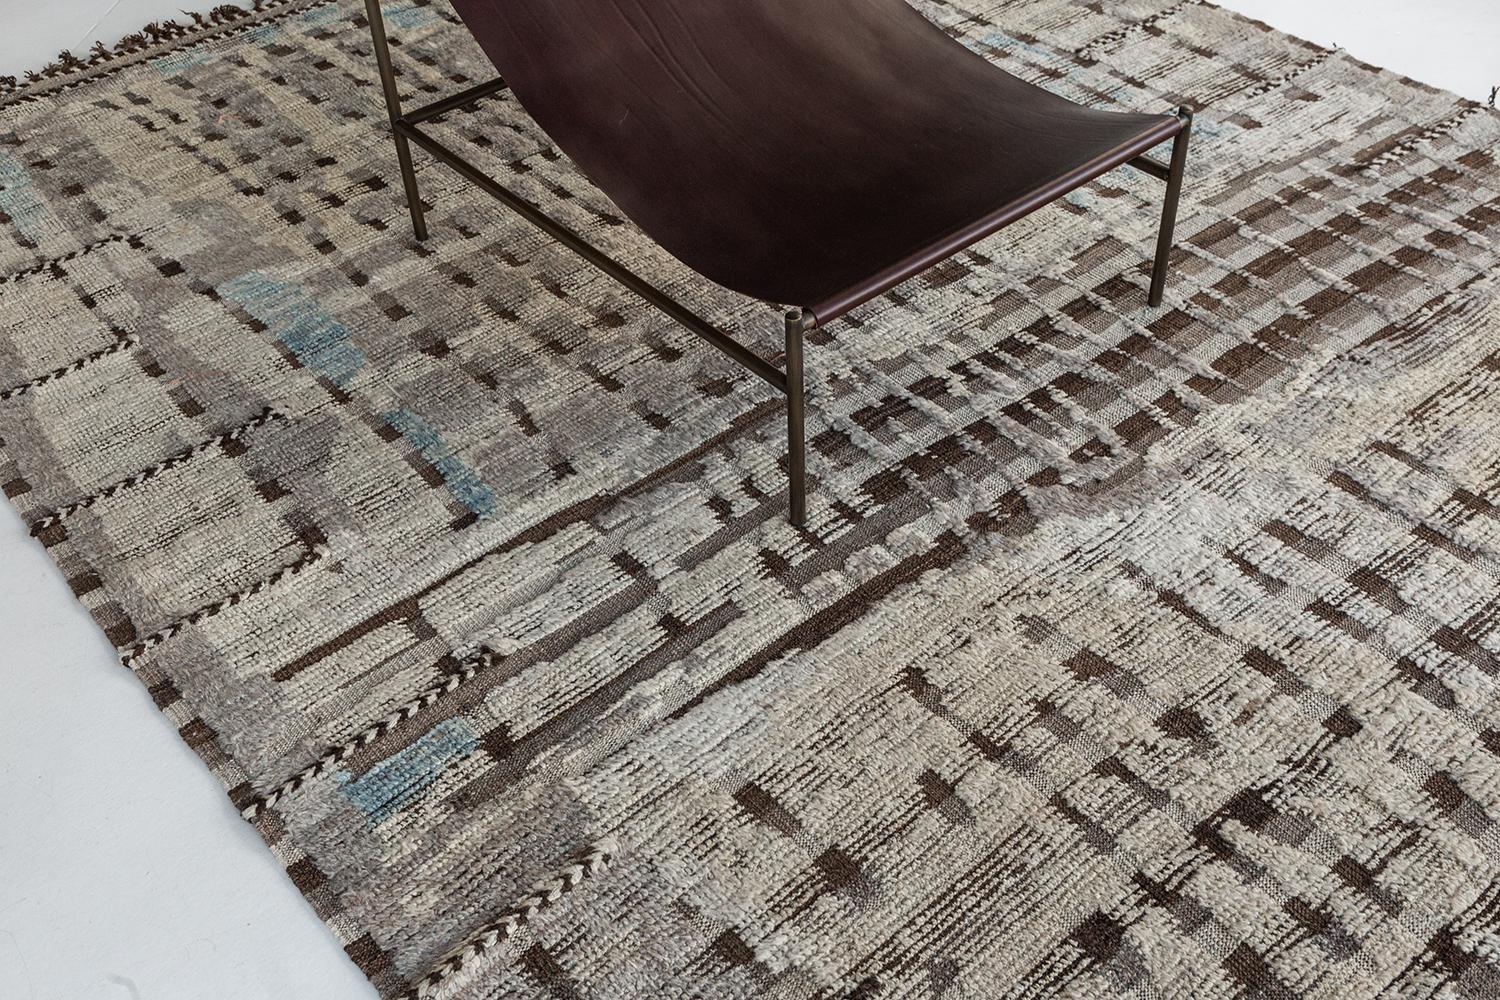 Tamarix is made of luxurious wool and is made of timeless design elements. It's weaving of earthy colors and modern design elements are what makes the Atlas Collection so unique and sought after. Mehraban's Atlas collection is noted for its